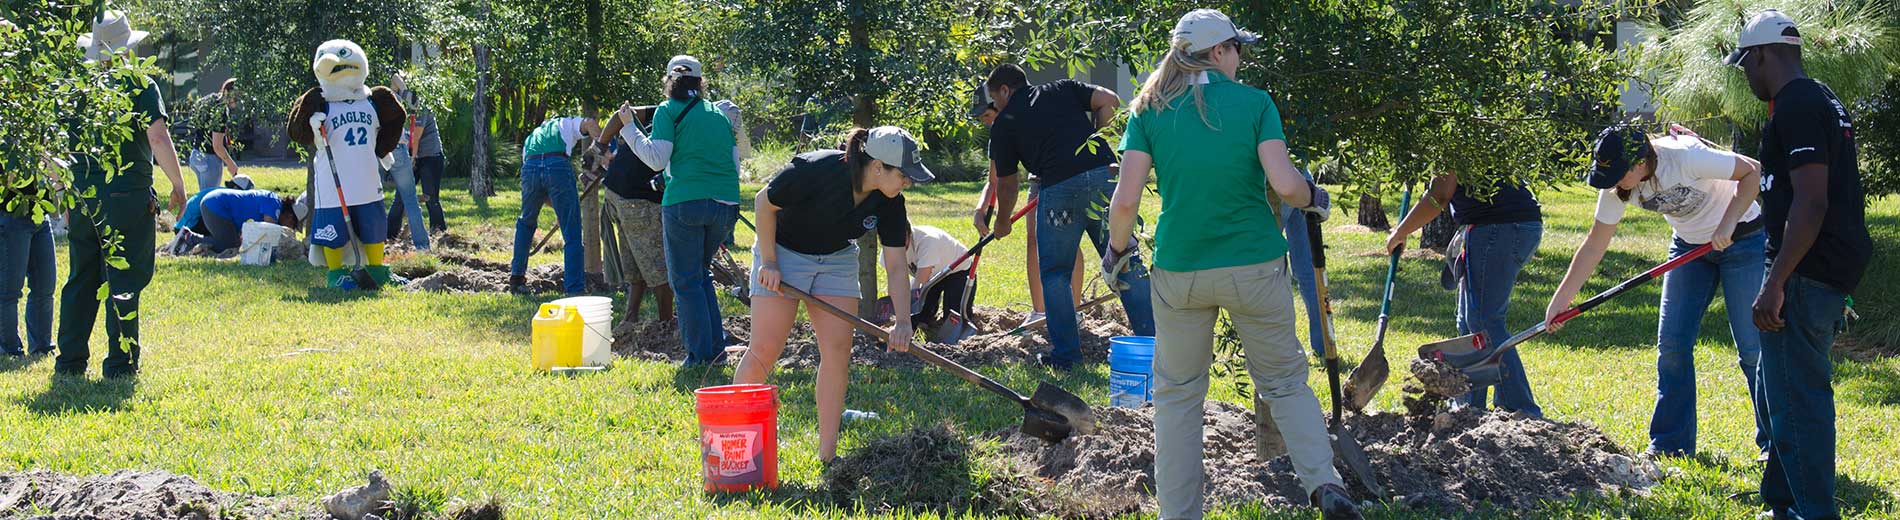 Photo shows FGCU students and staff planting trees